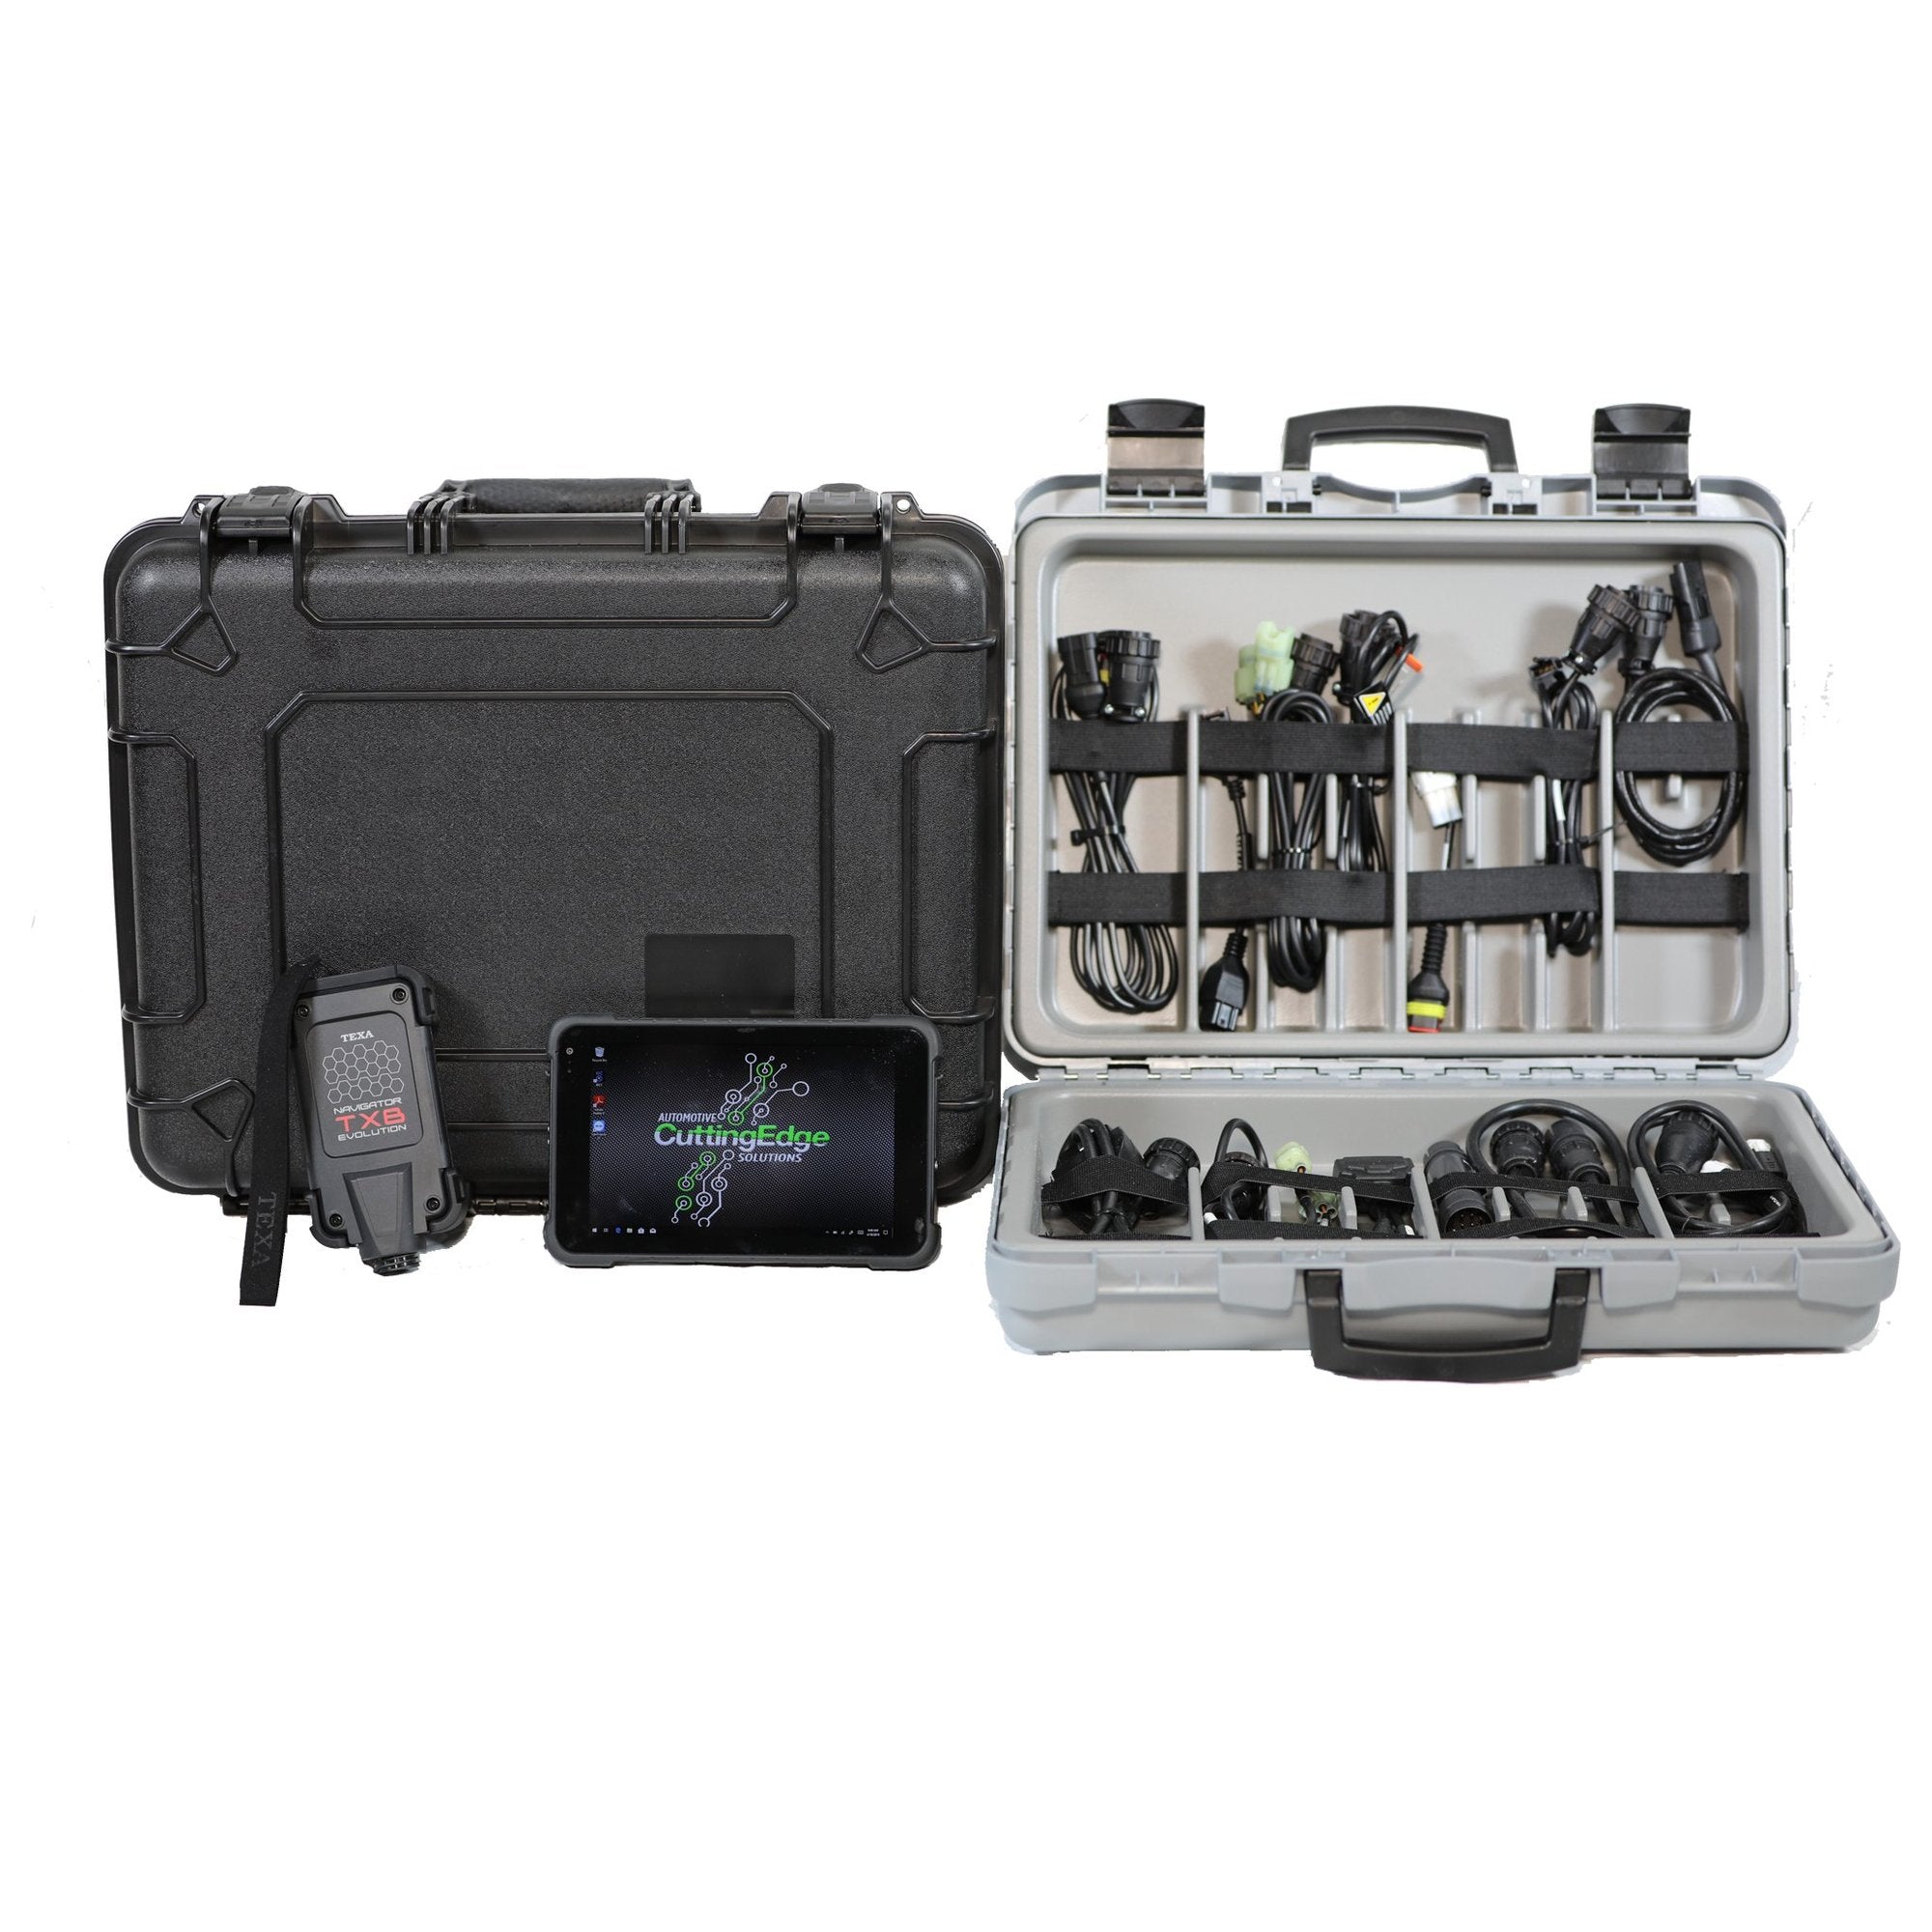 TEXA Premium Bike Package with Rugged Tablet